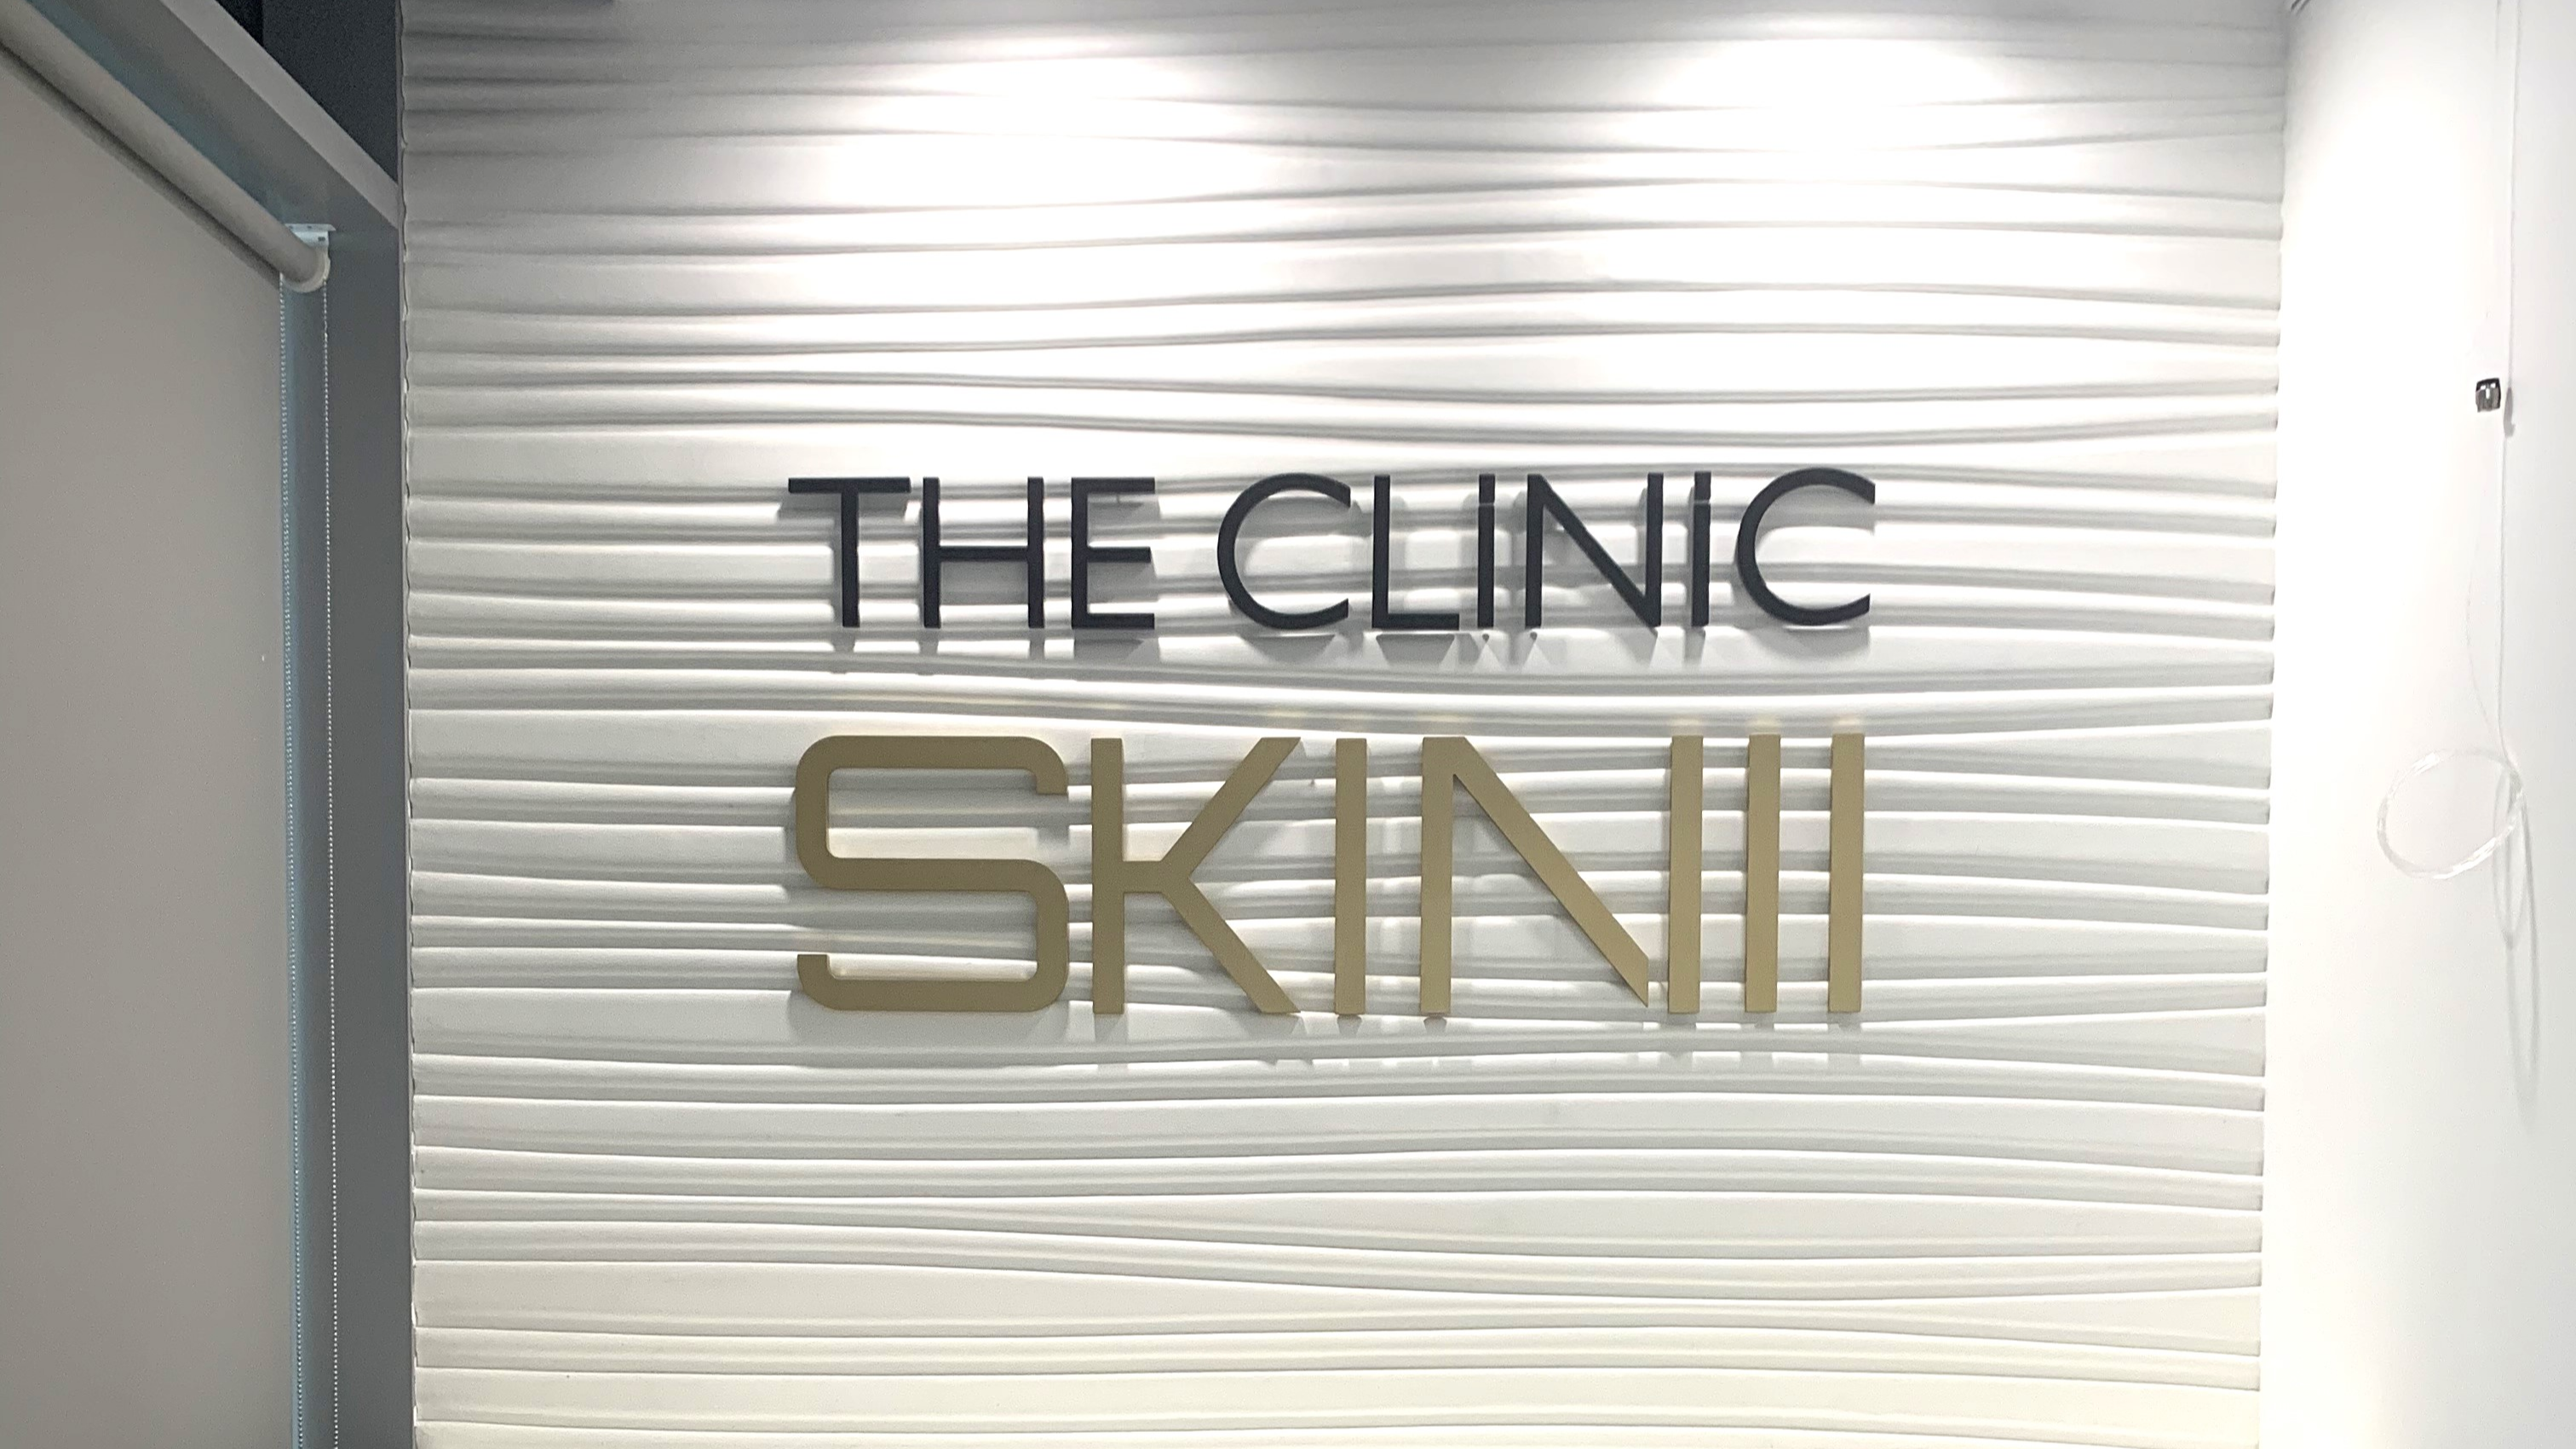 https://adgully.me/post/4033/skin111-ventures-into-dental-care-with-new-facility-in-difc